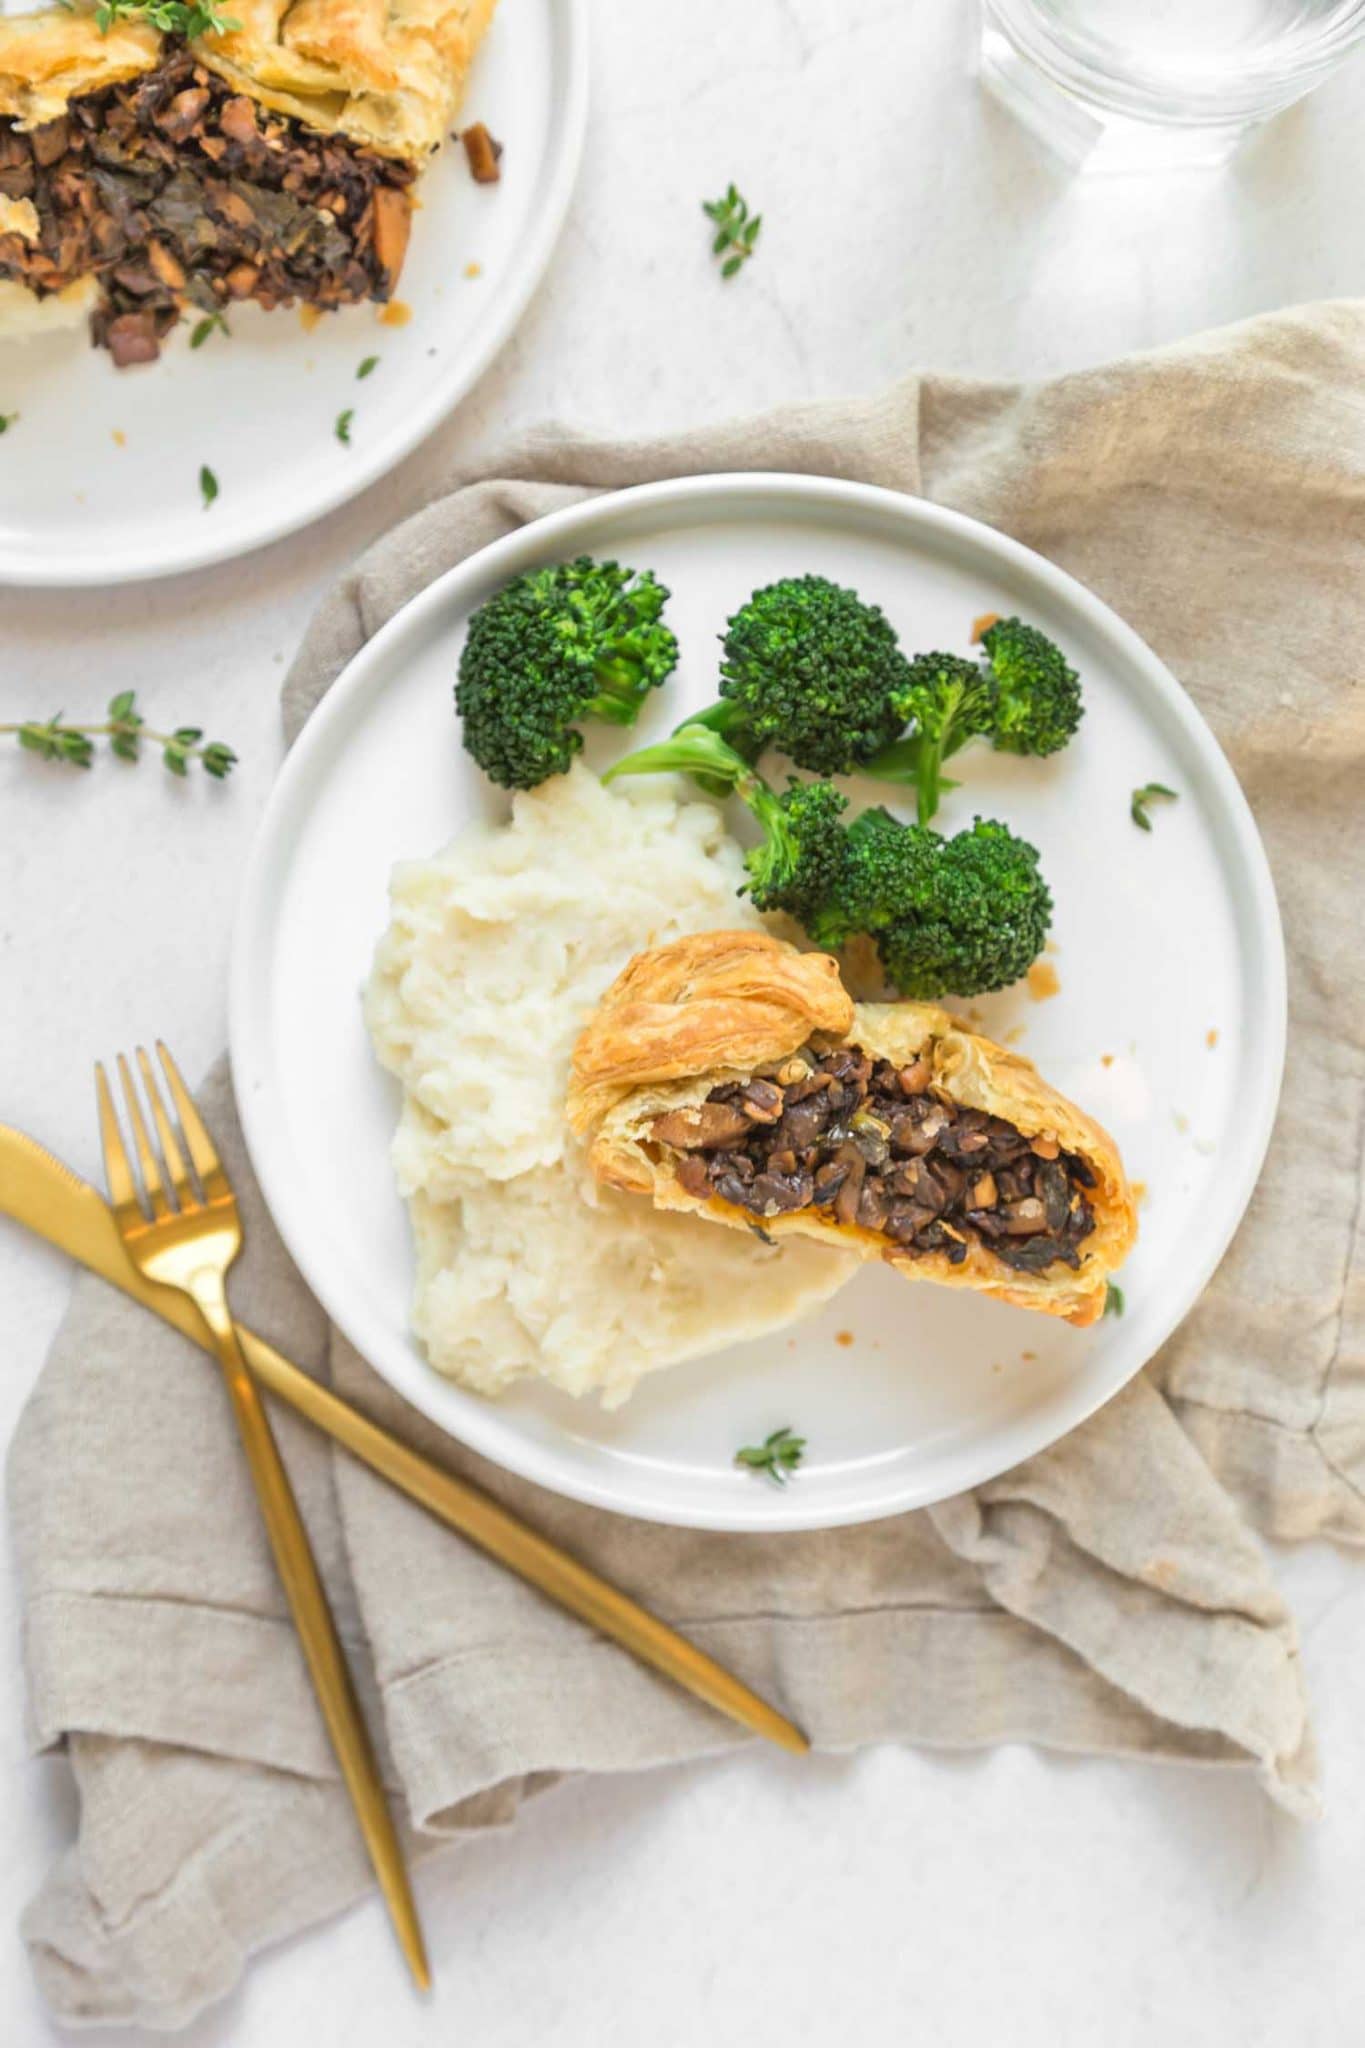 slice of mushroom wellington served with broccoli and mashed potatoes on a plate